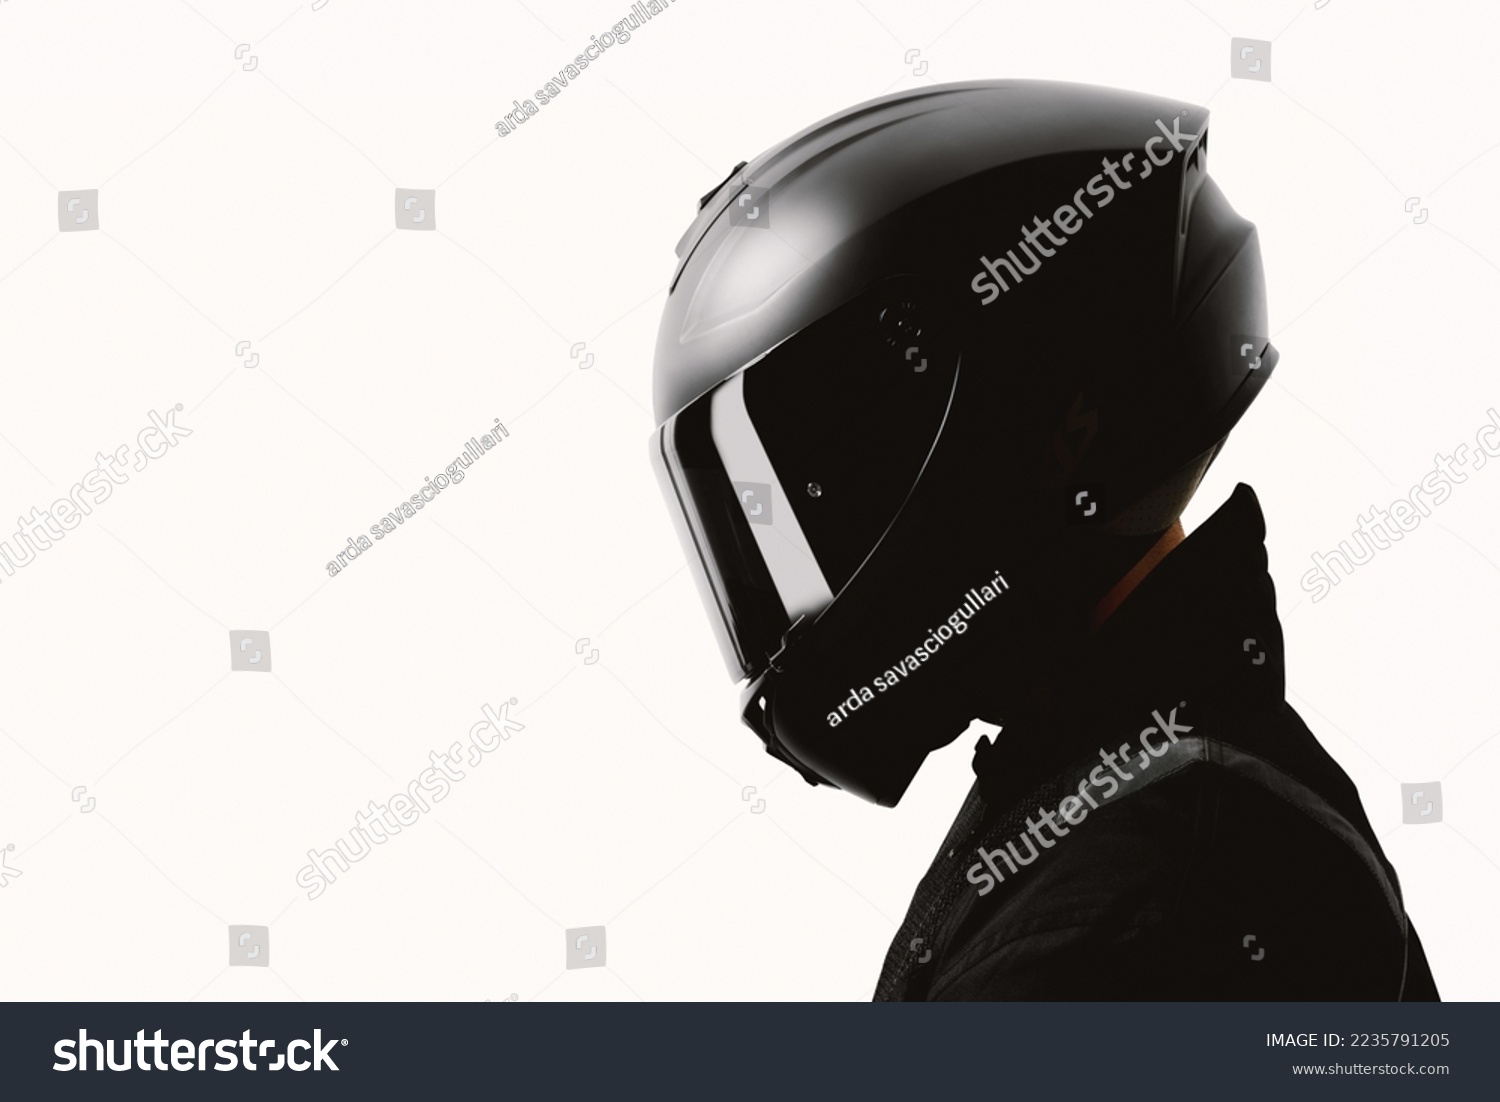 Portrait of a motorcycle rider posing with a black helmet on a white background. #2235791205